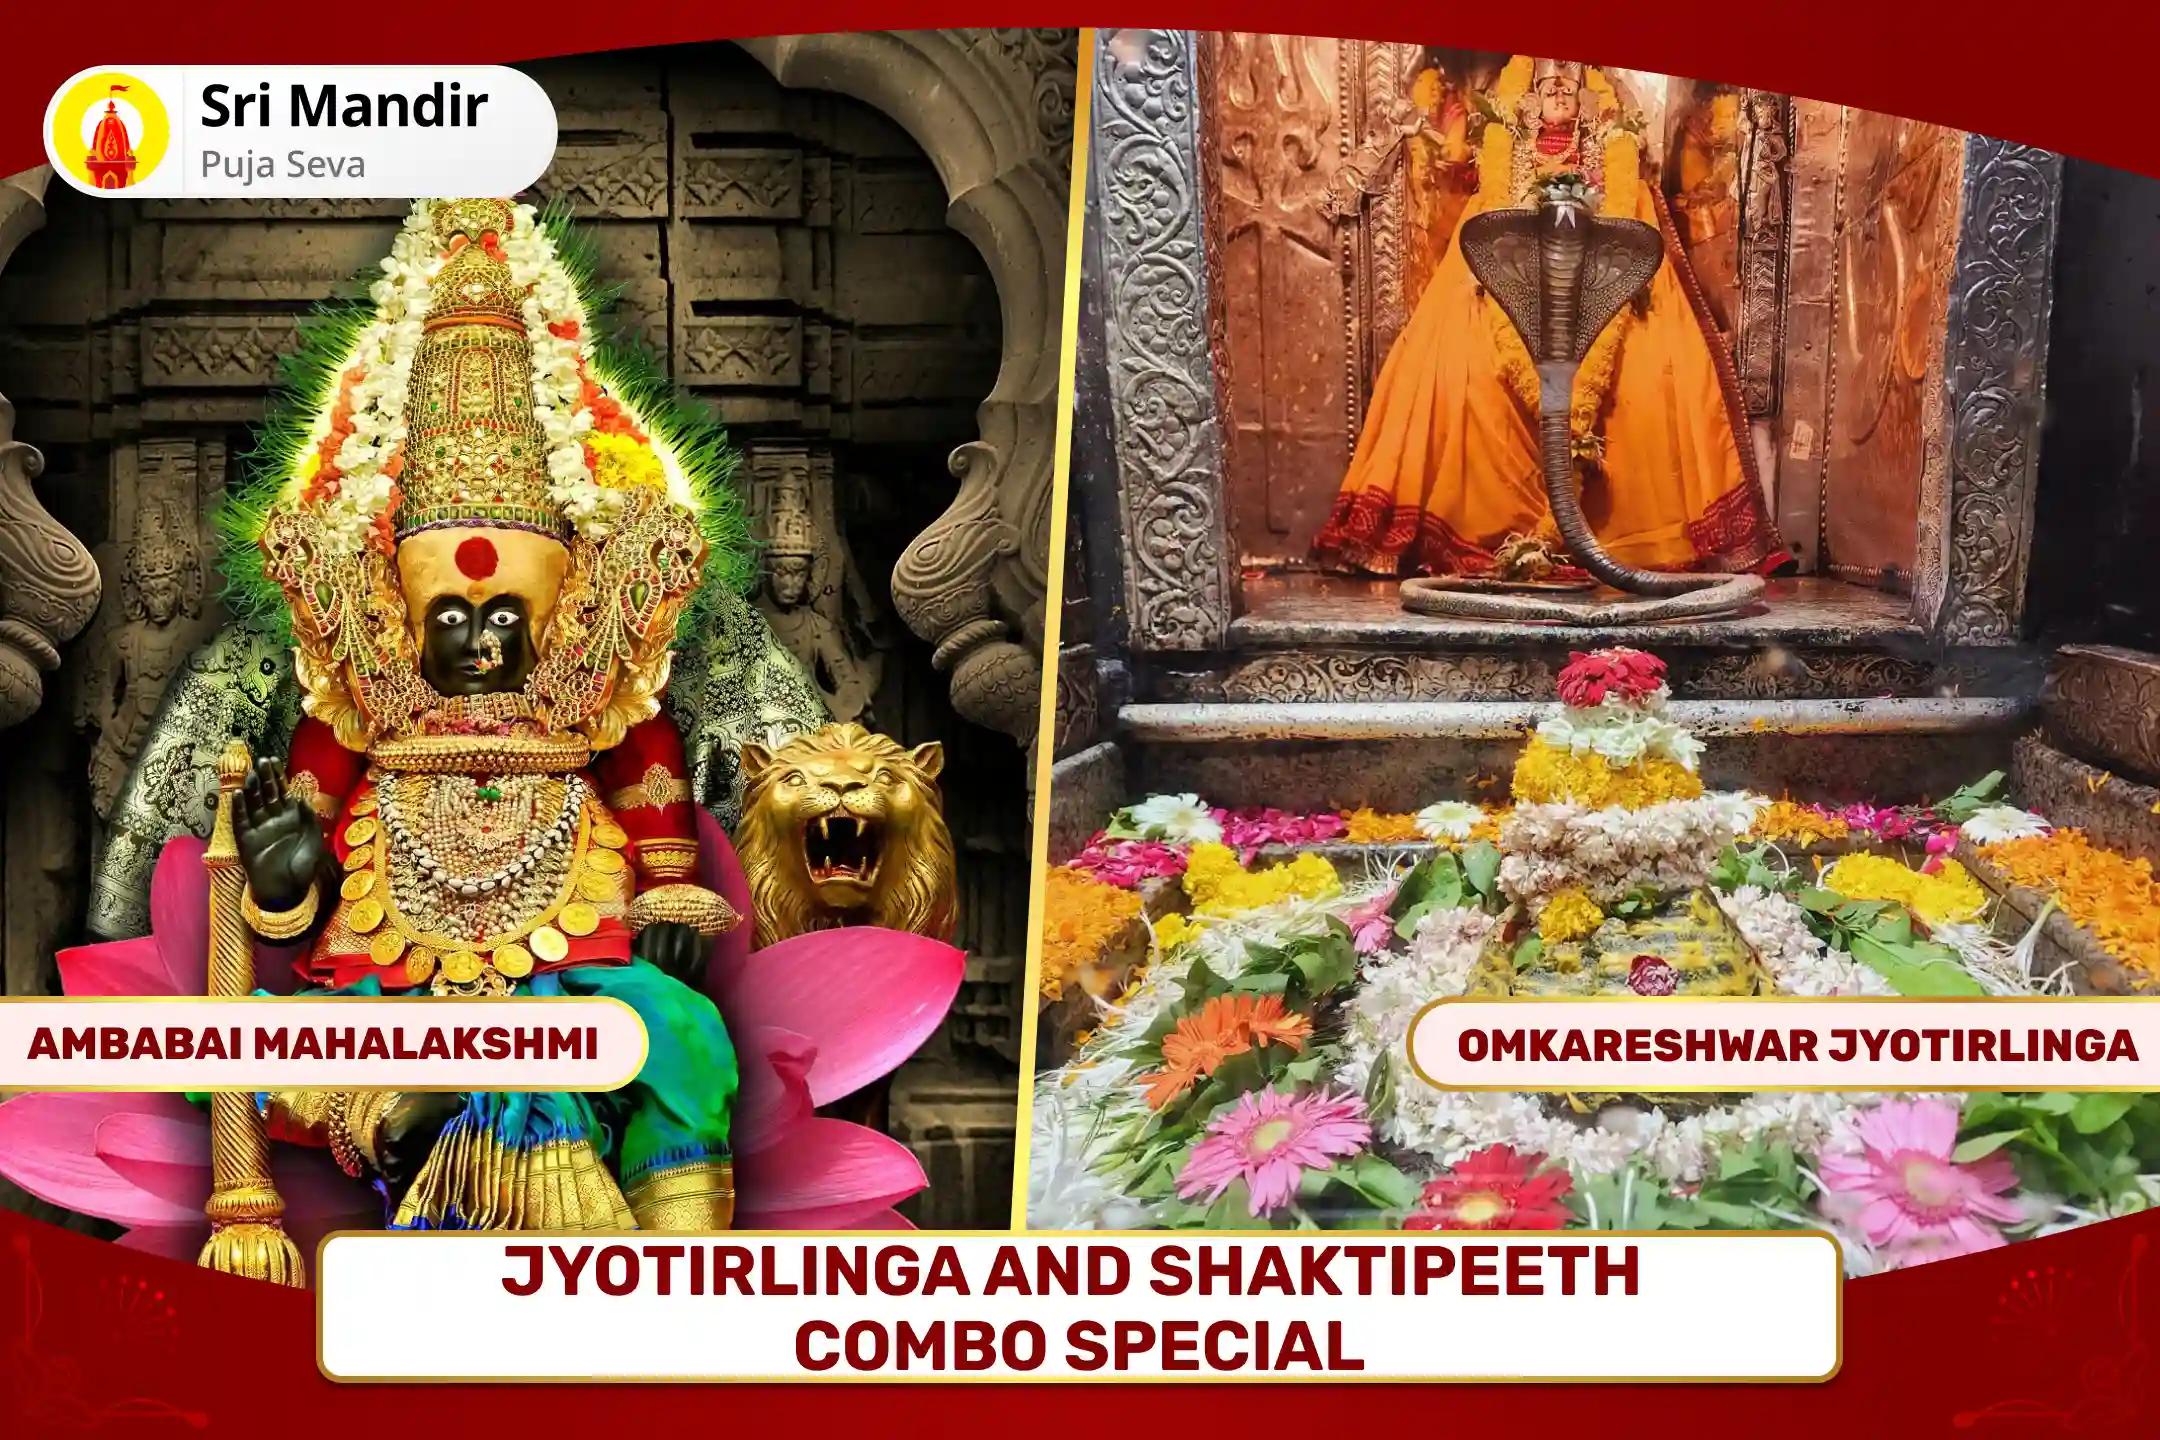 Jyotirlinga and Shaktipeeth Combo Special Shiv Dwadash Jyotirlinga Stotra Path and Mahalakshmi Puja to Attain Prosperity and Fearlessness